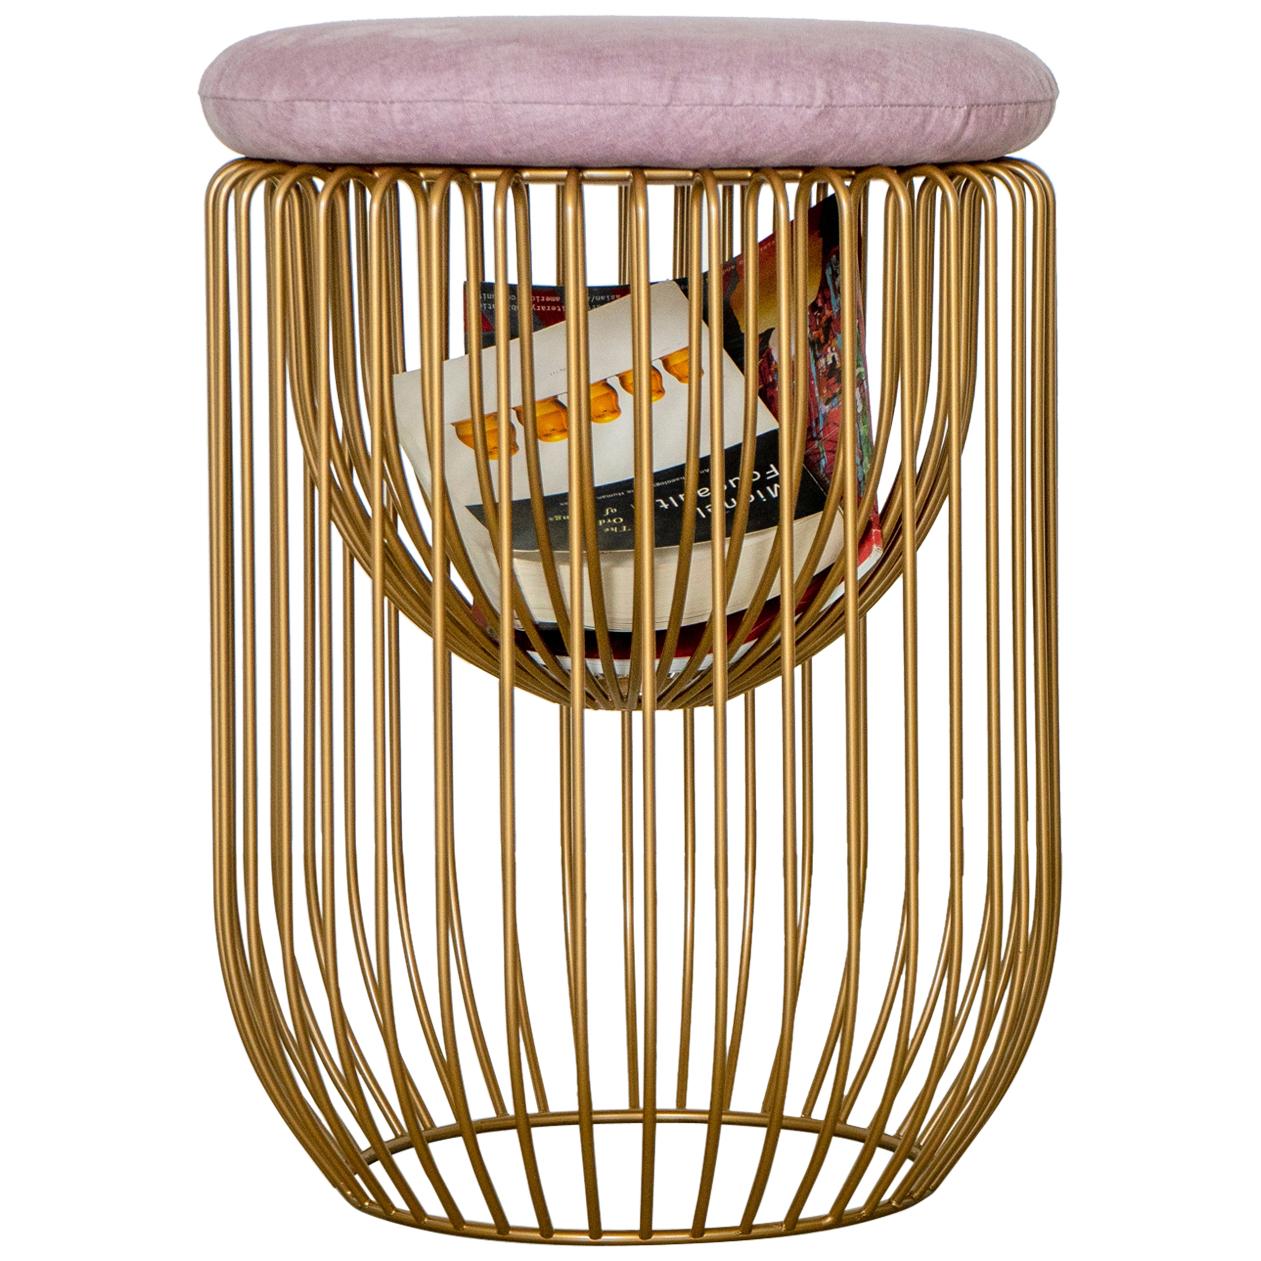 Nido Stool with Upholstered Pillow in Pink